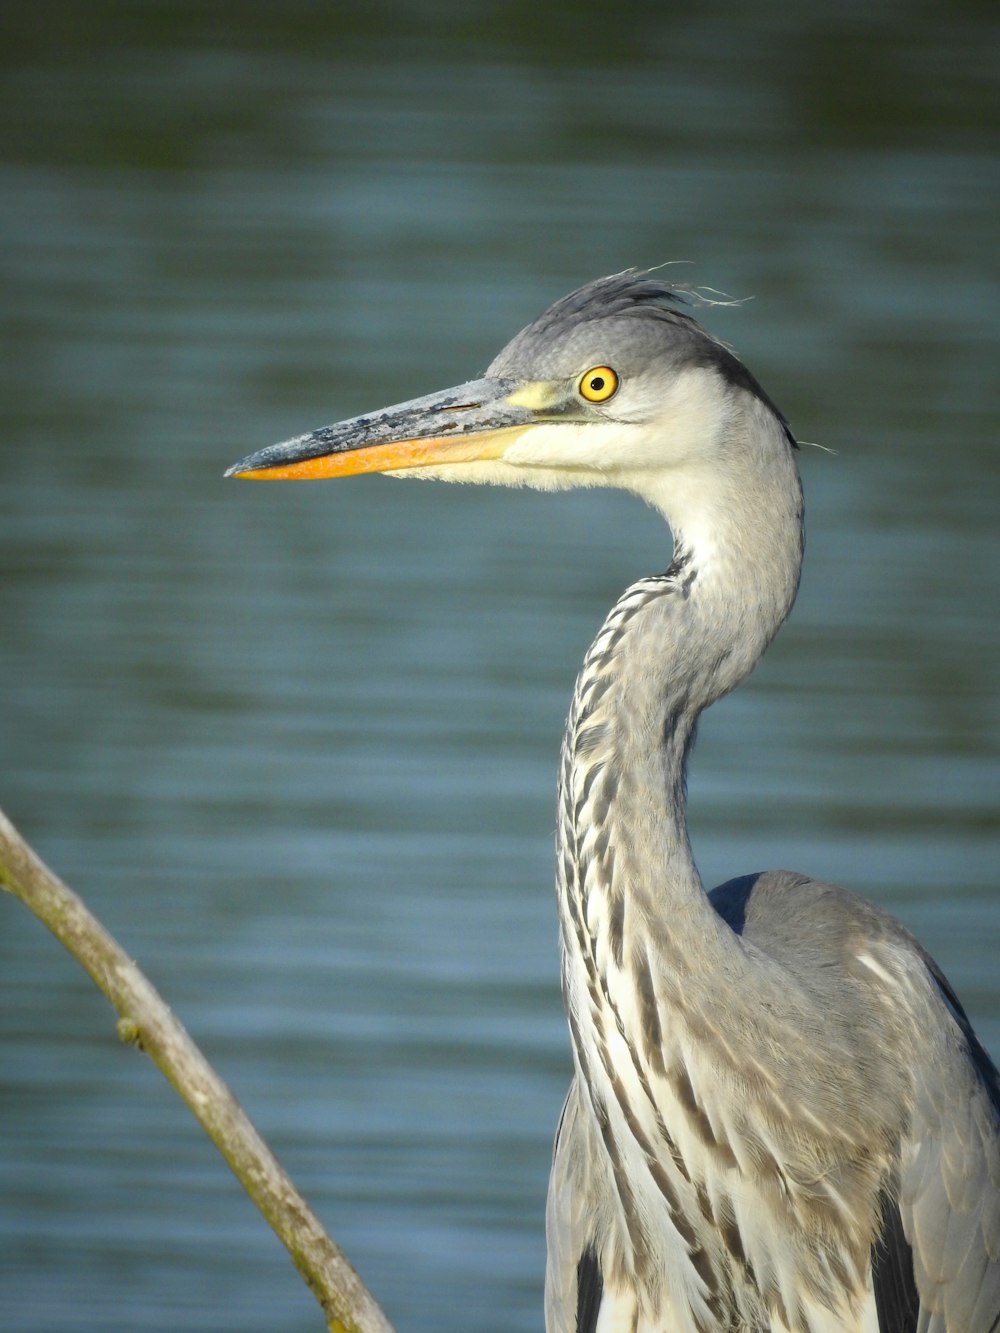 a close up of a bird on a branch near a body of water